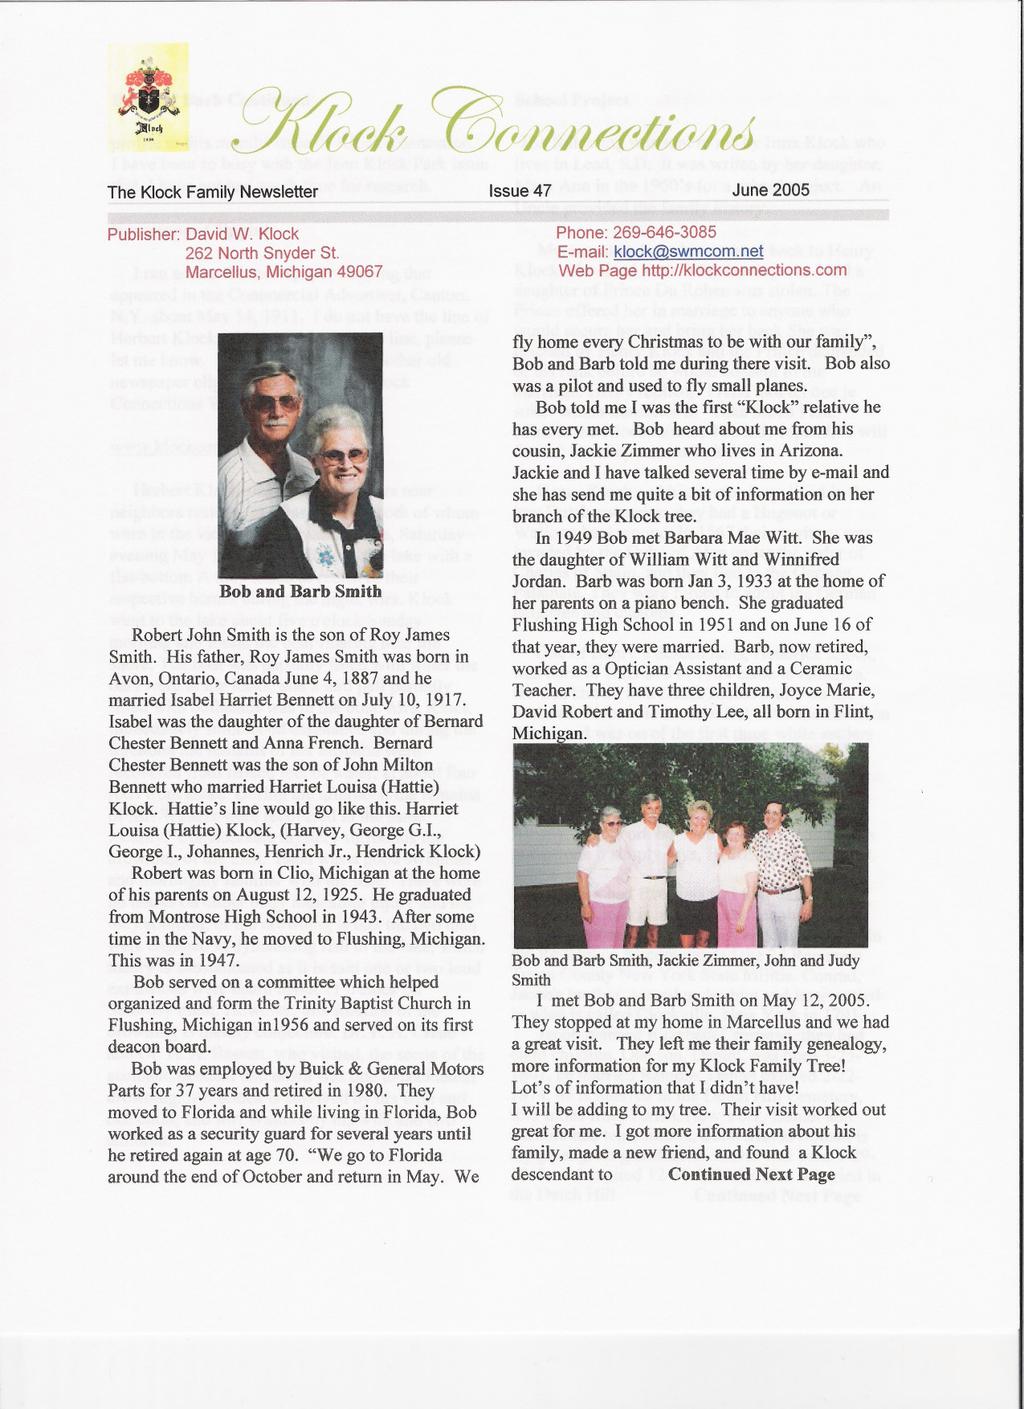 The Klock Family Newsletter Publisher: David W. Klock 262 North Snyder St. Marcellus, Michigan 49067 Issue 47 June 2005 Phone: 269-646-3085 E-mail: klock@swmcom.net Web Page http://klockconnections.